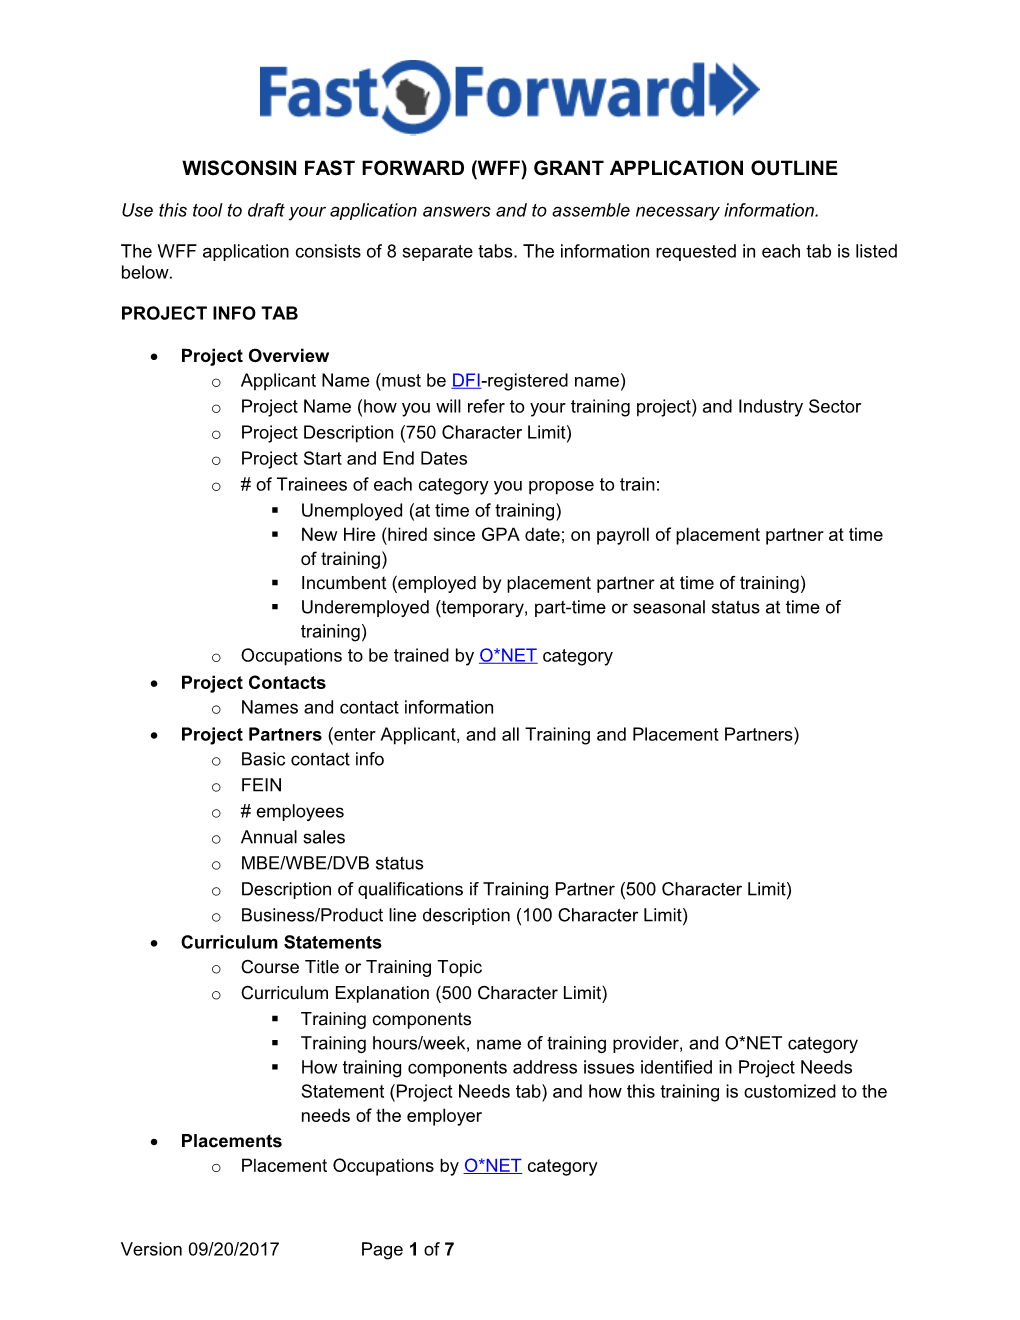 Wisconsin Fast Forward (Wff) Grant Application Outline